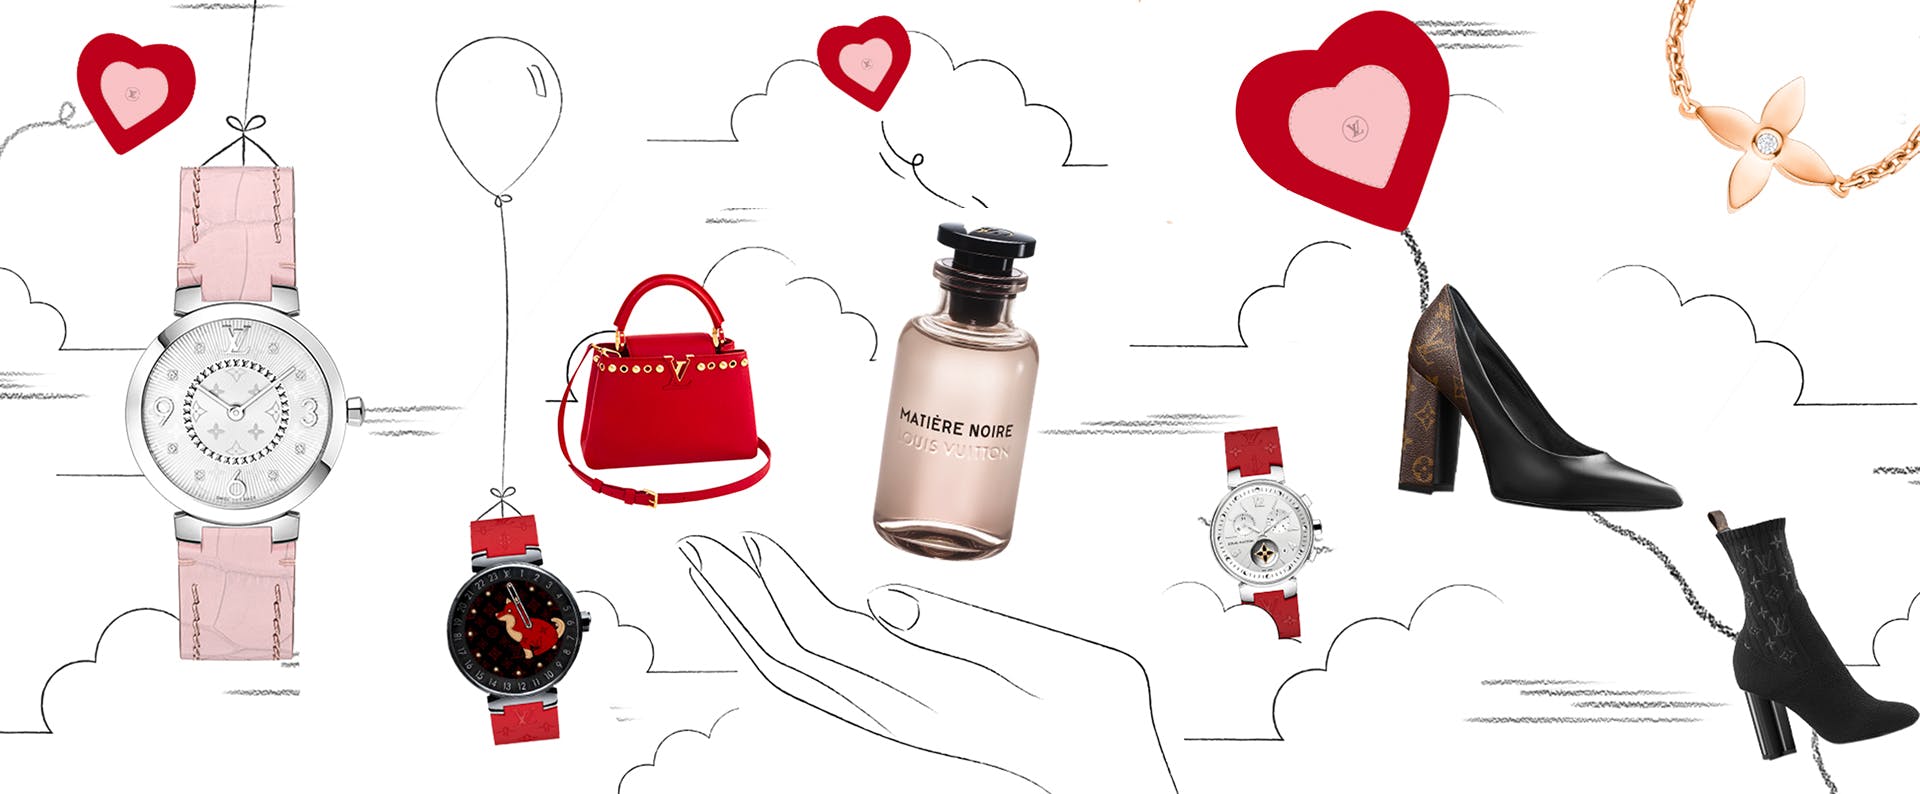 Louis Vuitton unveils its Valentine's Day collection for 2018 in a